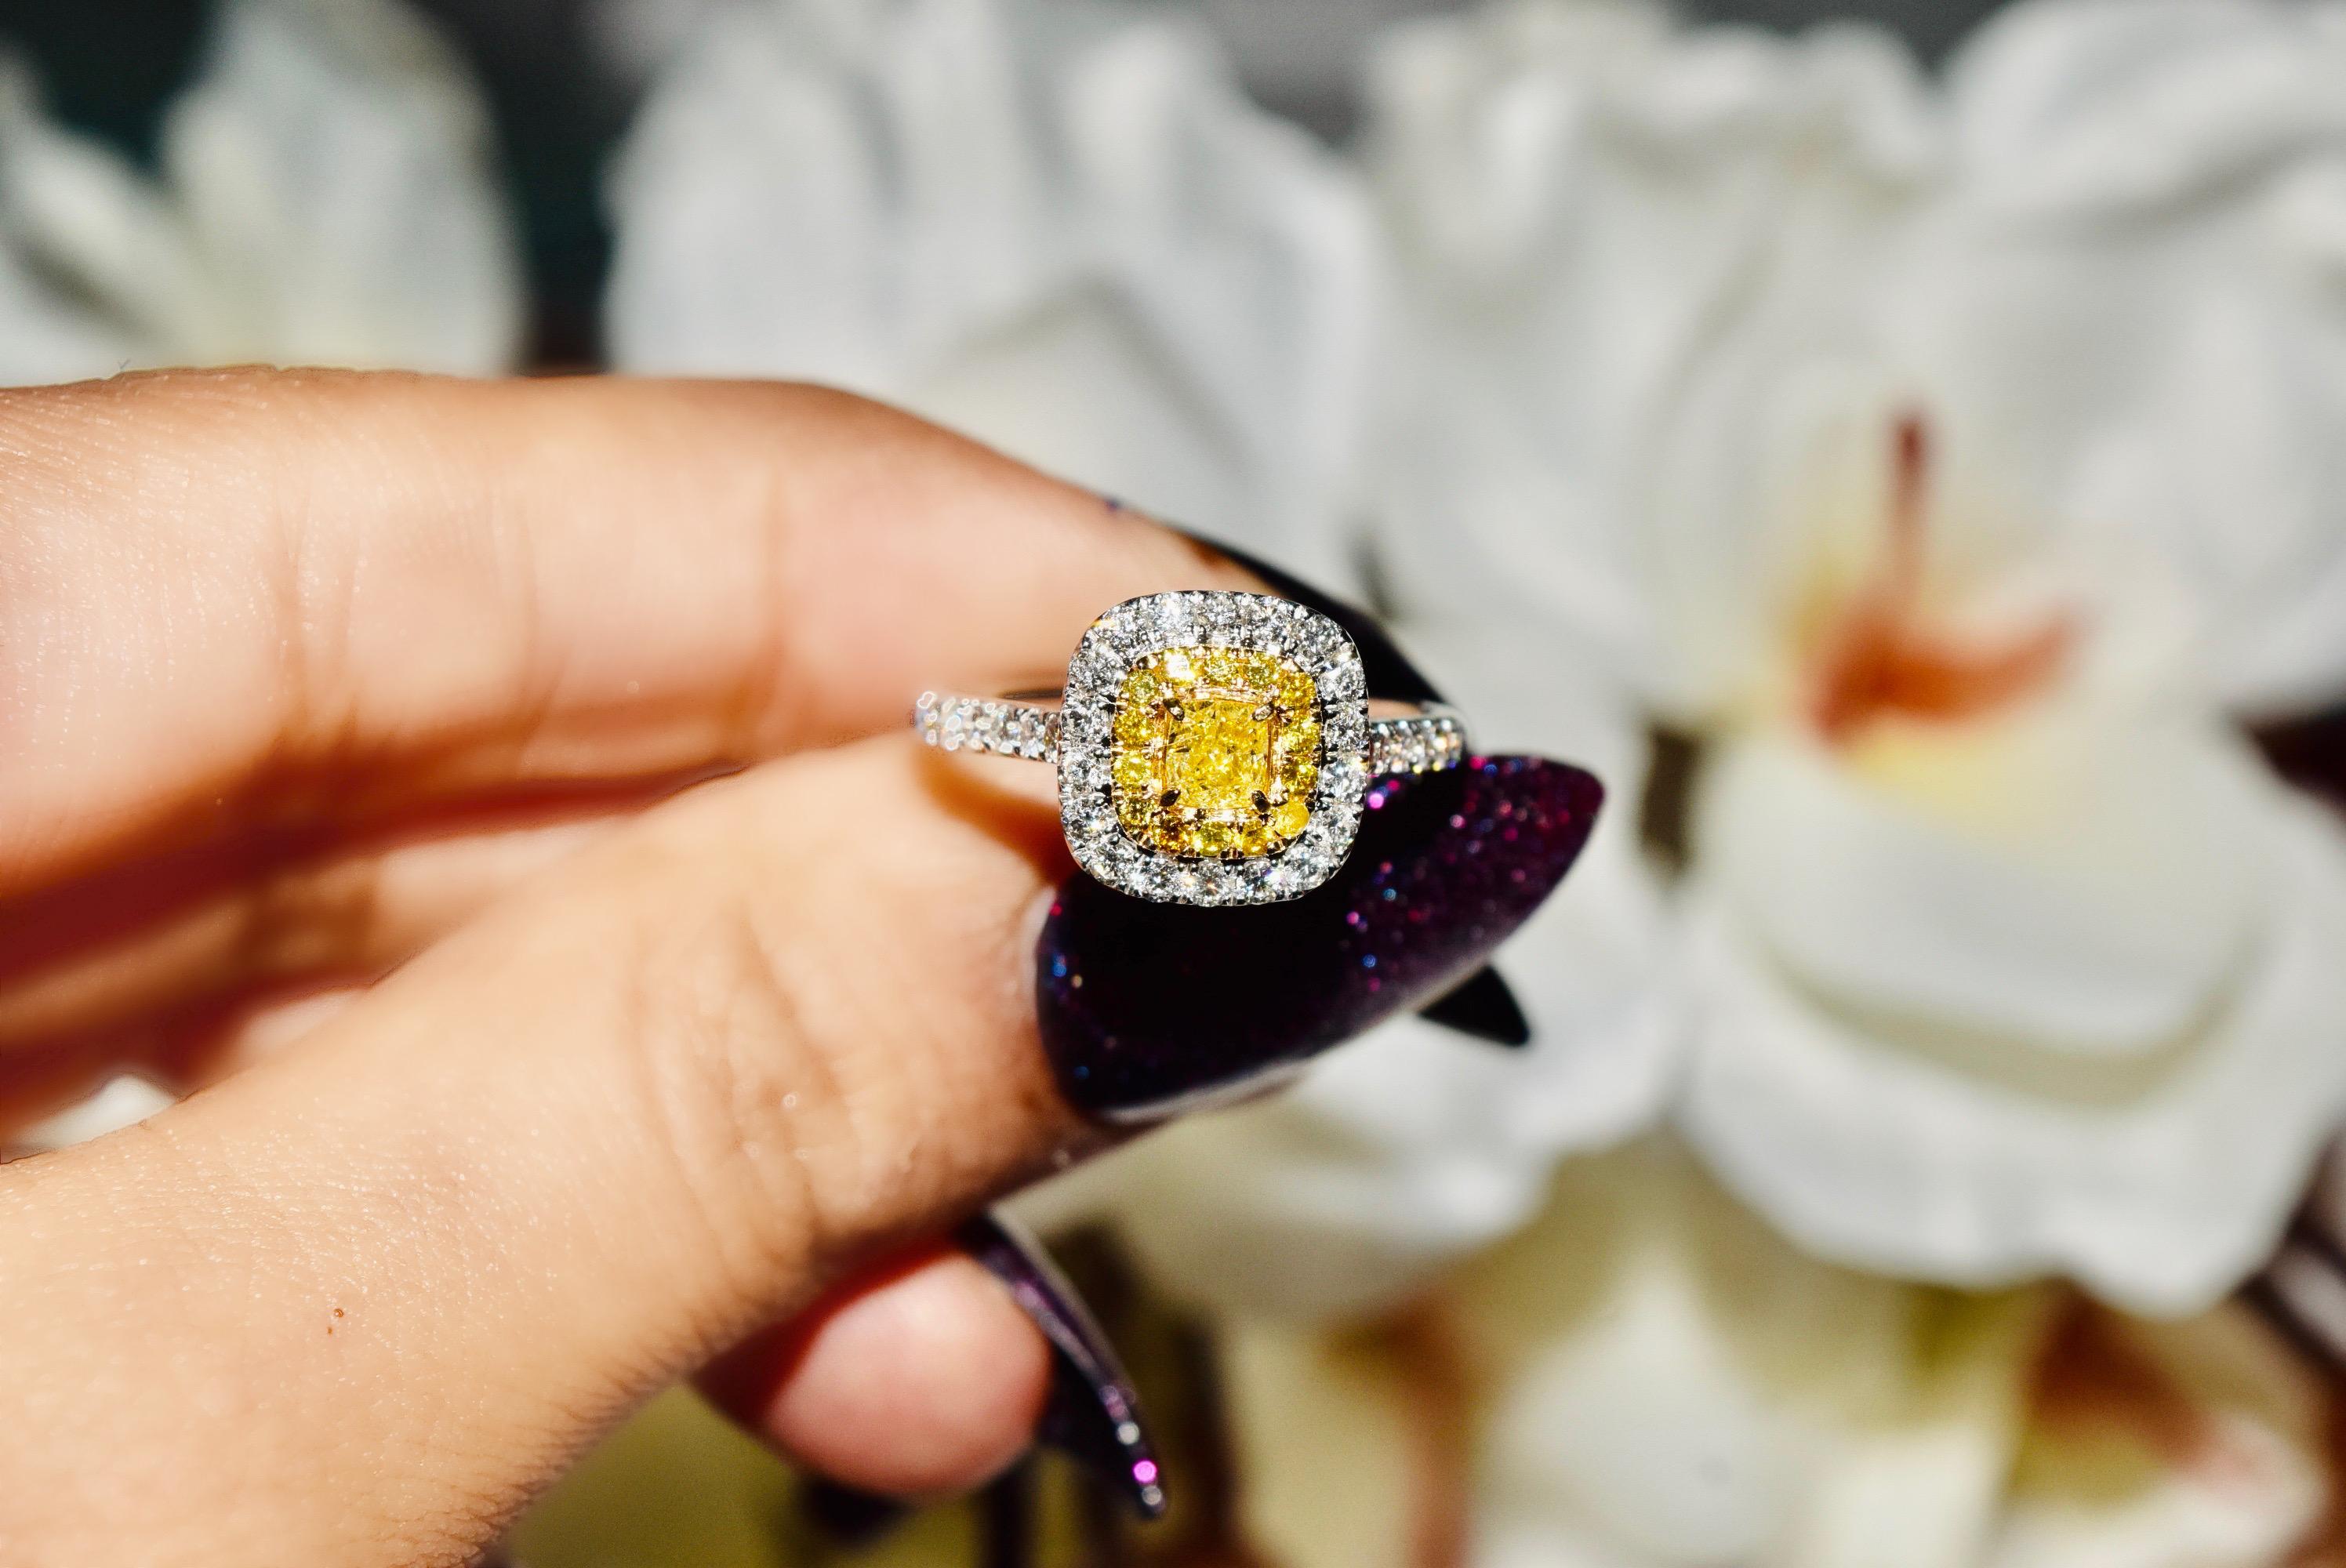 **100% NATURAL FANCY COLOUR DIAMOND JEWELLERY**

✪ Jewellery Details ✪

♦ MAIN STONE DETAILS

➛ Stone Shape: Cushion
➛ Stone Color: Fancy Yellow
➛ Stone Weight: 0.27 carat
➛ Clarity: SI
➛ AGL certified

♦ SIDE STONE DETAILS

➛ Side yellow diamond